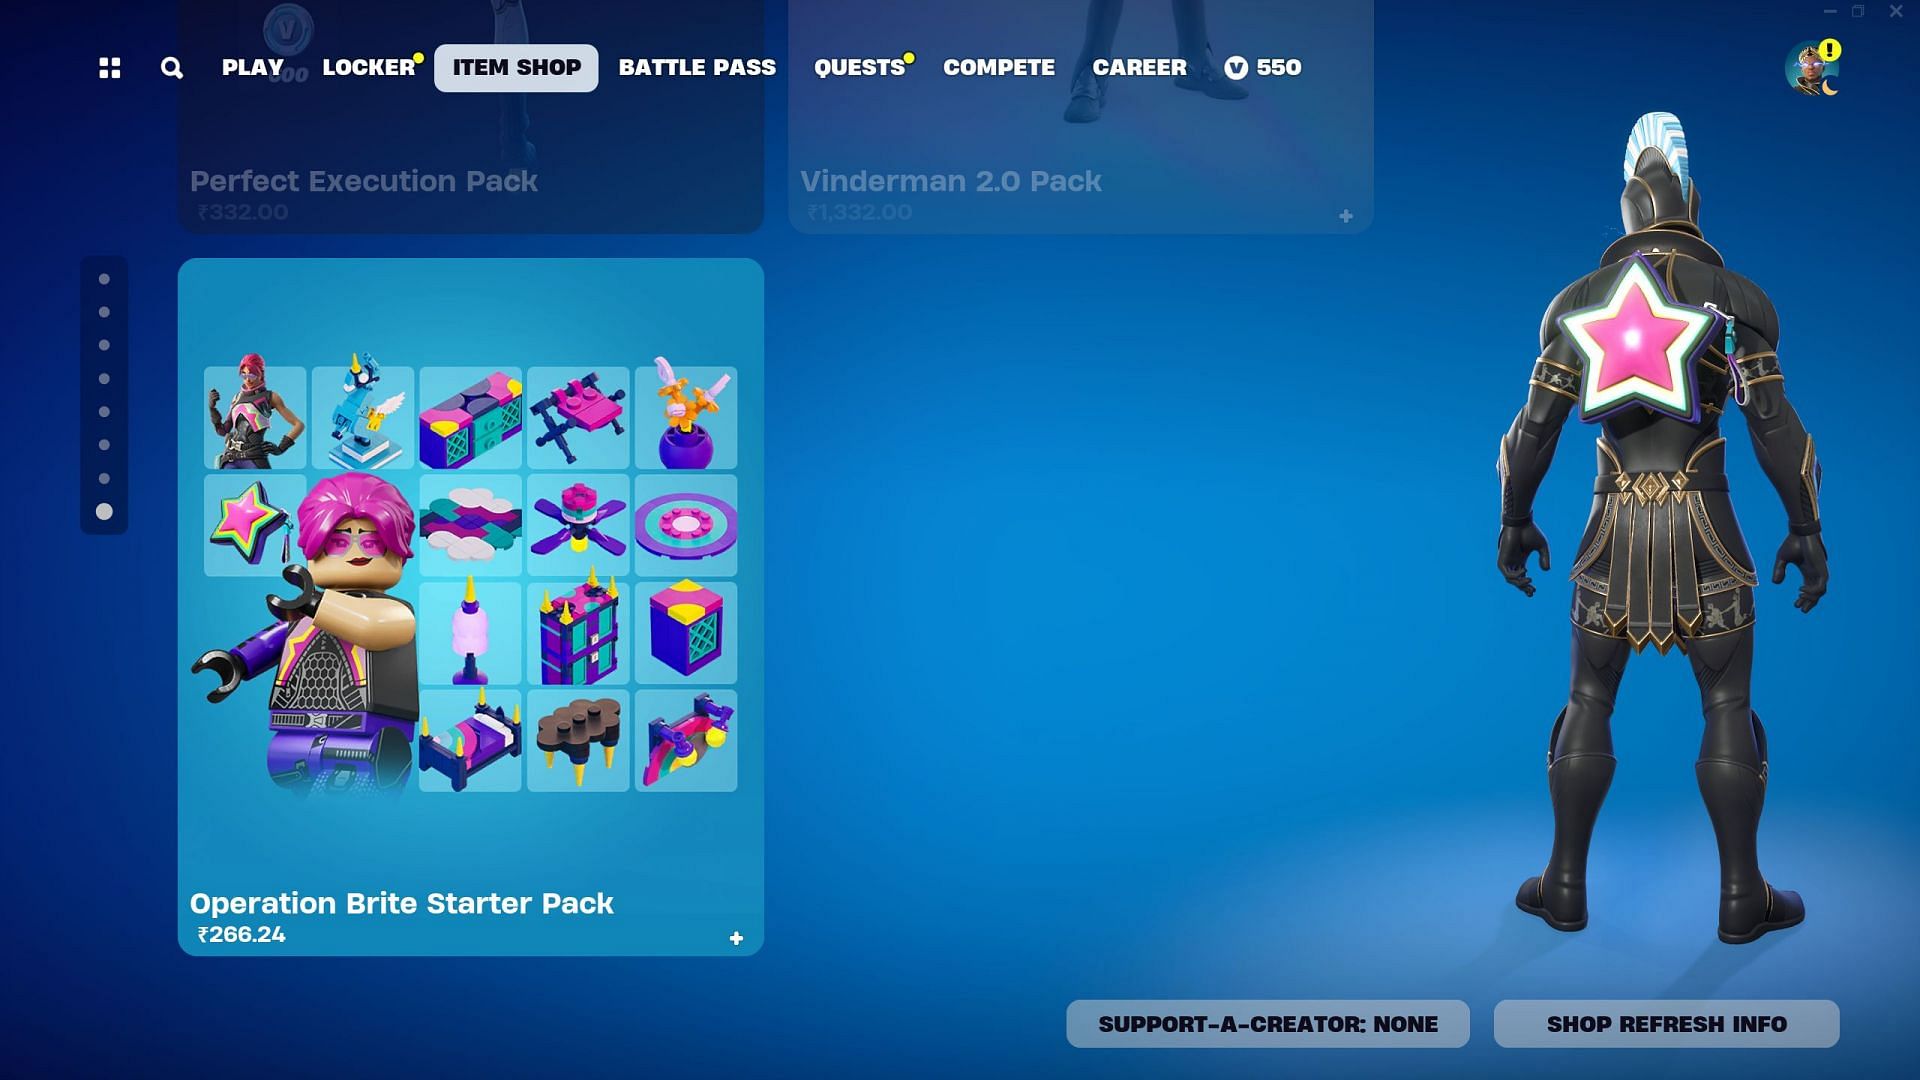 Brite Agent Skin is currently listed in the Item Shop (Image via Epic Games/Fortnite)